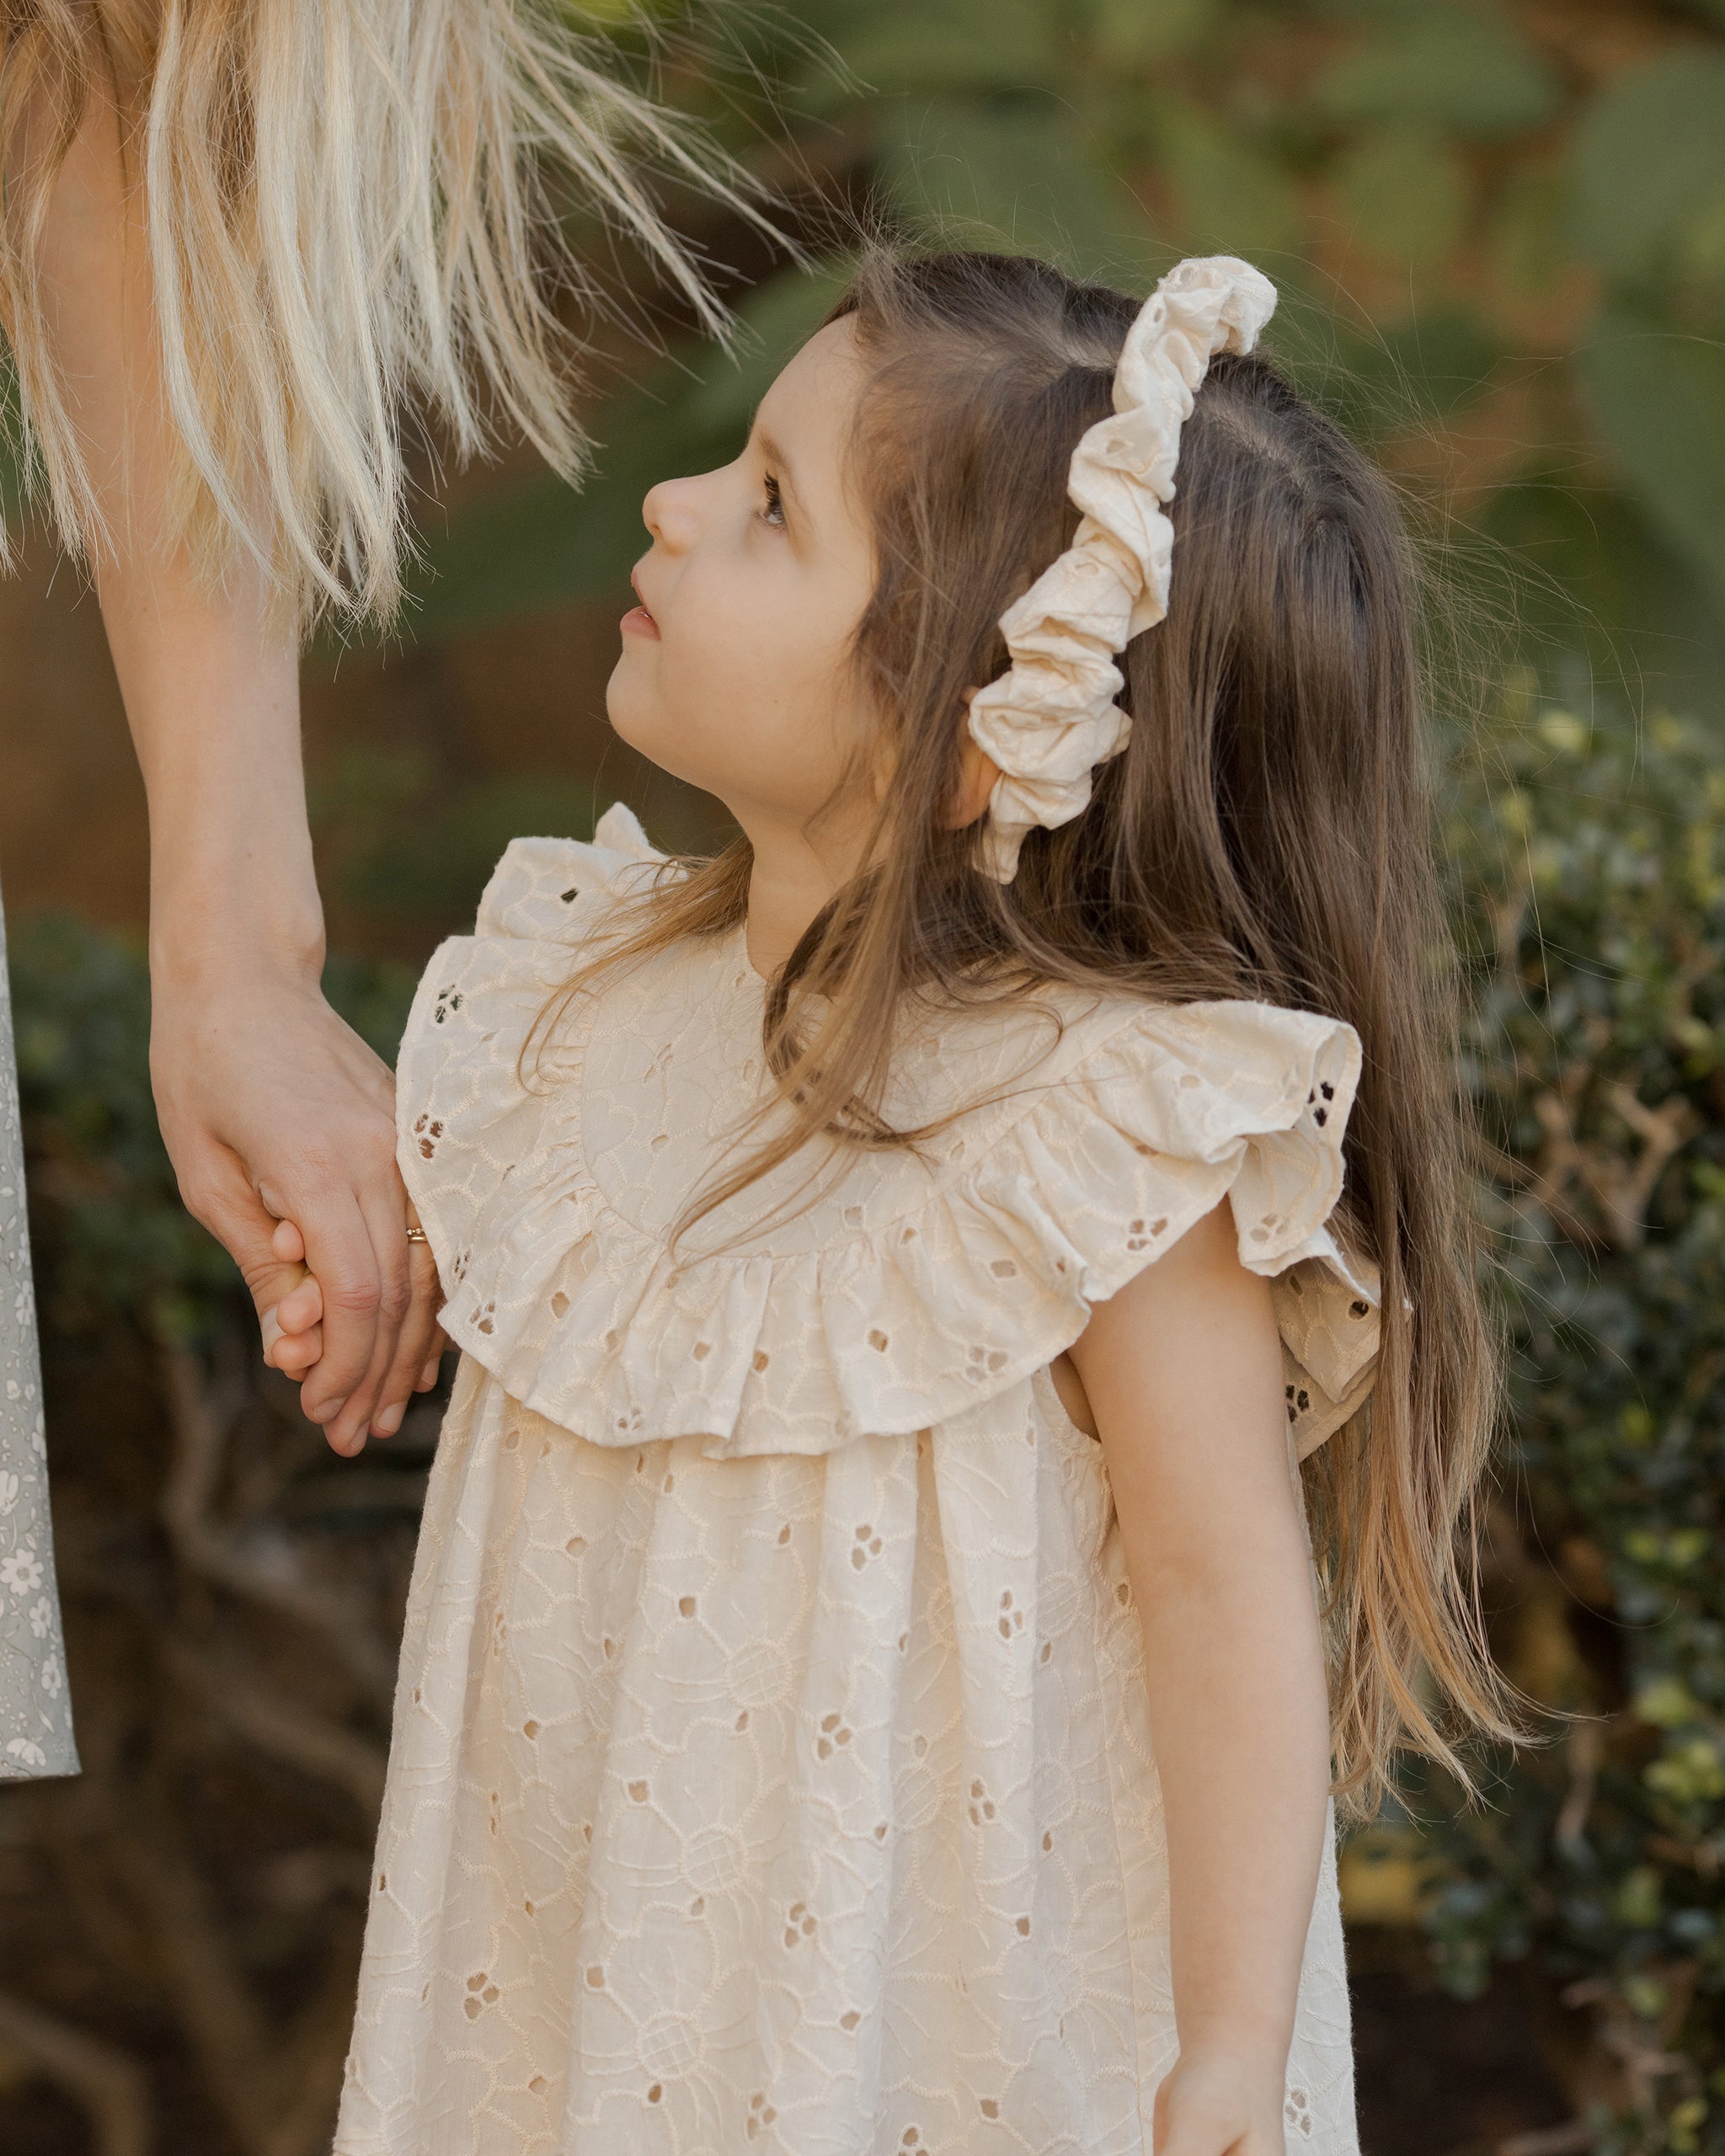 Sienna Dress || Daisy Eyelet - Rylee + Cru | Kids Clothes | Trendy Baby Clothes | Modern Infant Outfits |